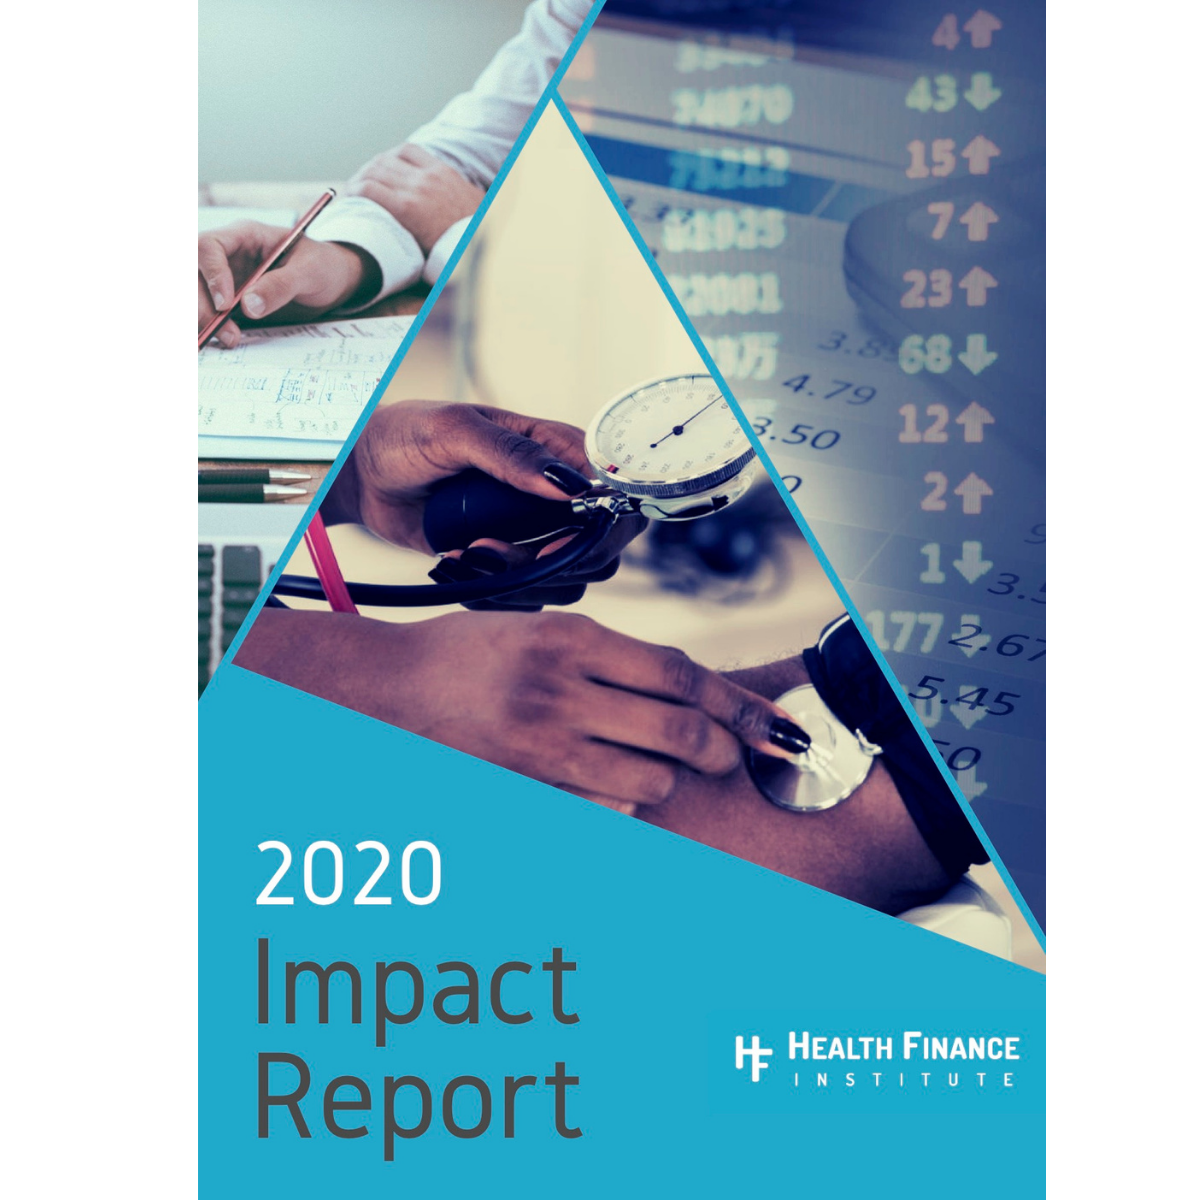 Impact report title page with person writing, person taking blood pressure, and stock market screen